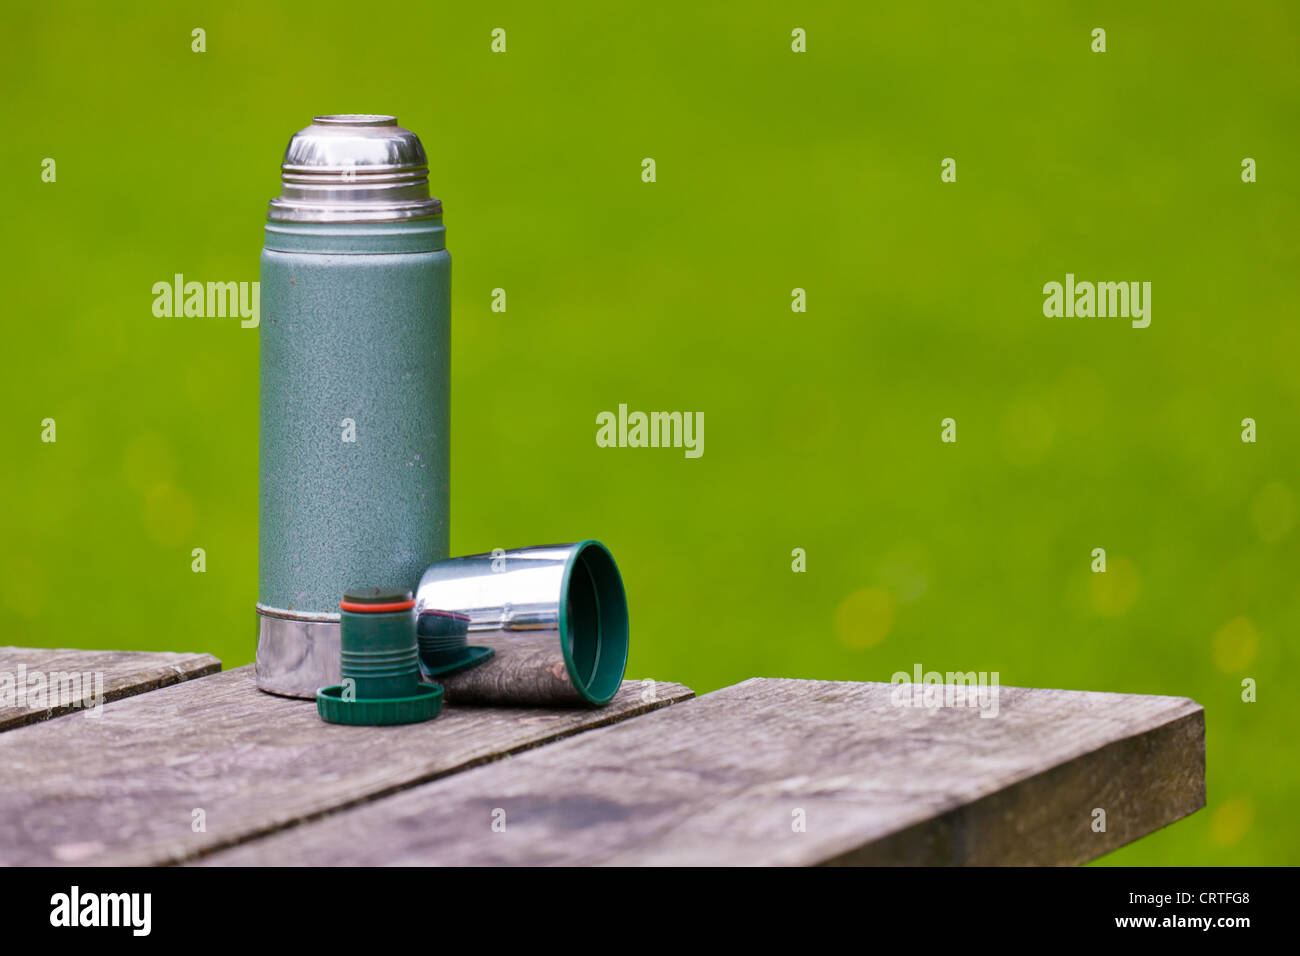 https://c8.alamy.com/comp/CRTFG8/thermos-flask-with-stopper-and-cup-cu-CRTFG8.jpg